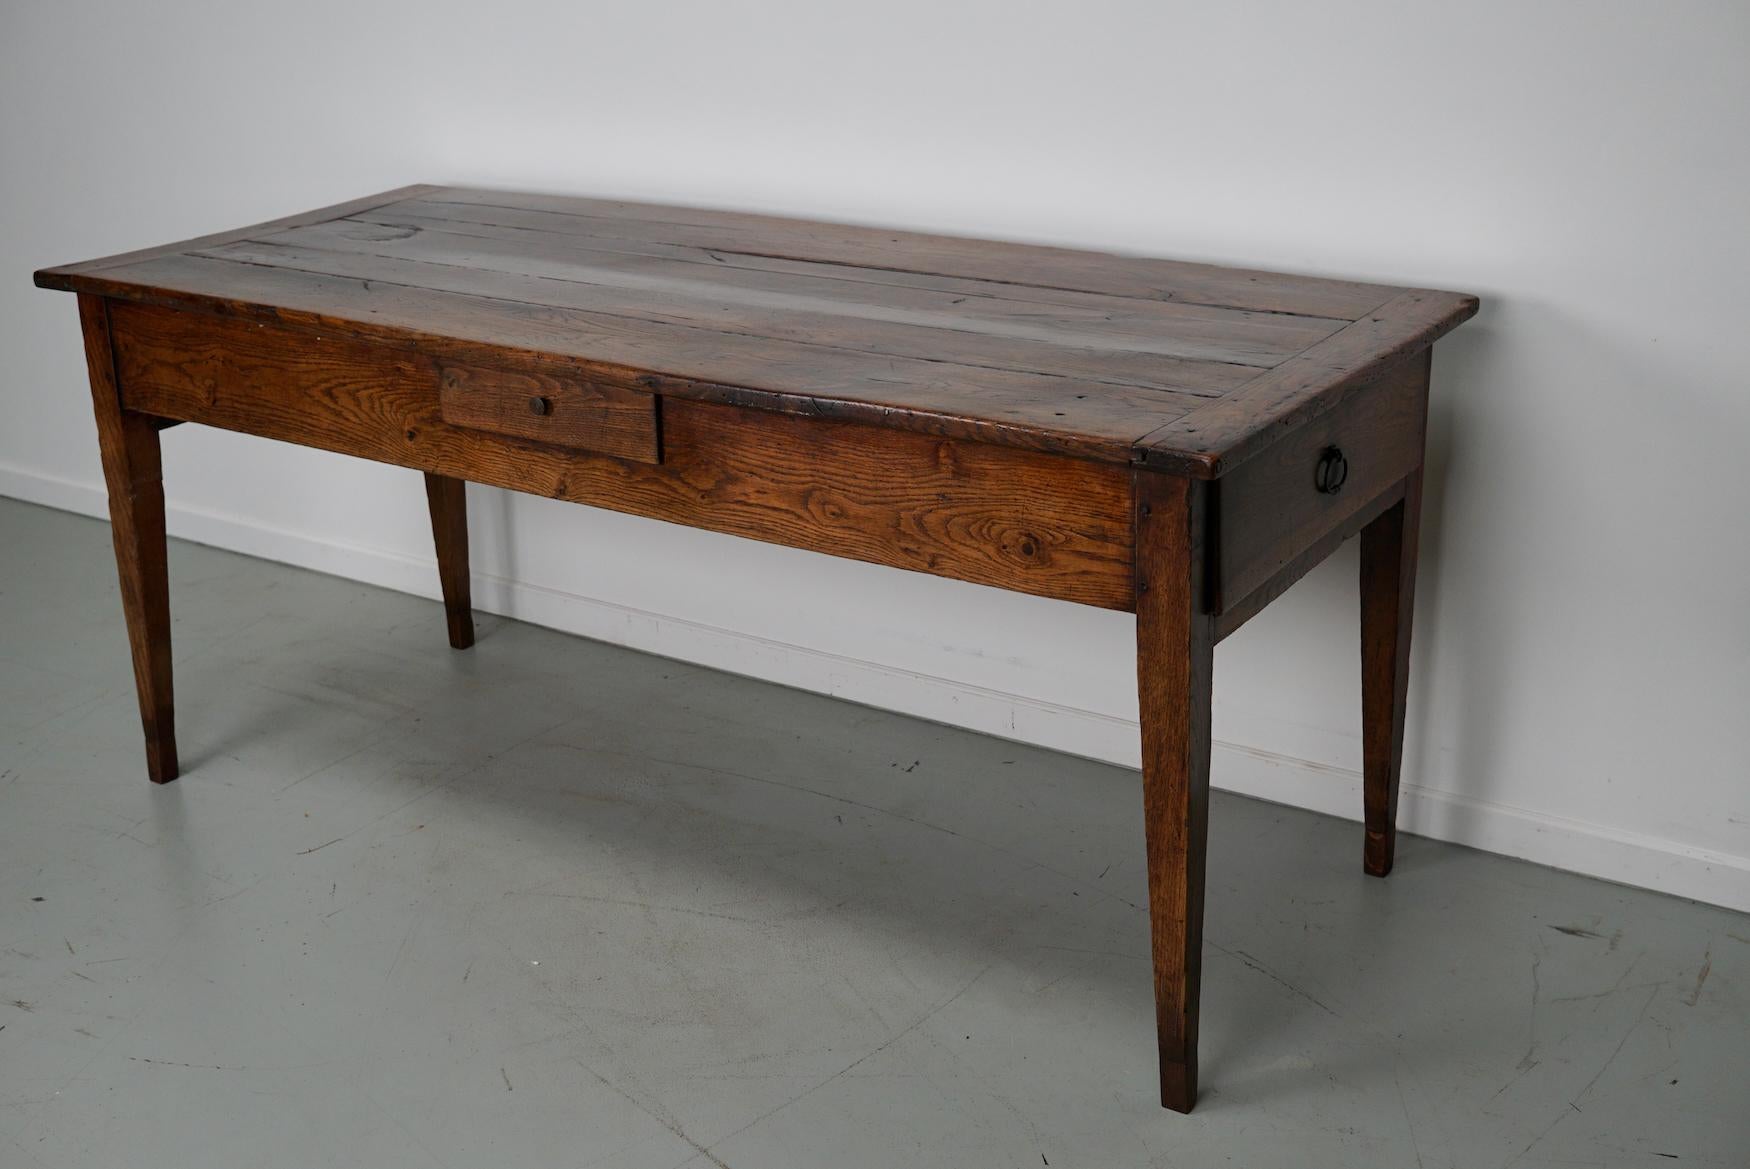 This French farmhouse table was made in the 19th century in France. It retained a very nice rich patina over the years with lot's of old marks and repairs. The leg room / knee height is 60 cm. It has three functional drawers.